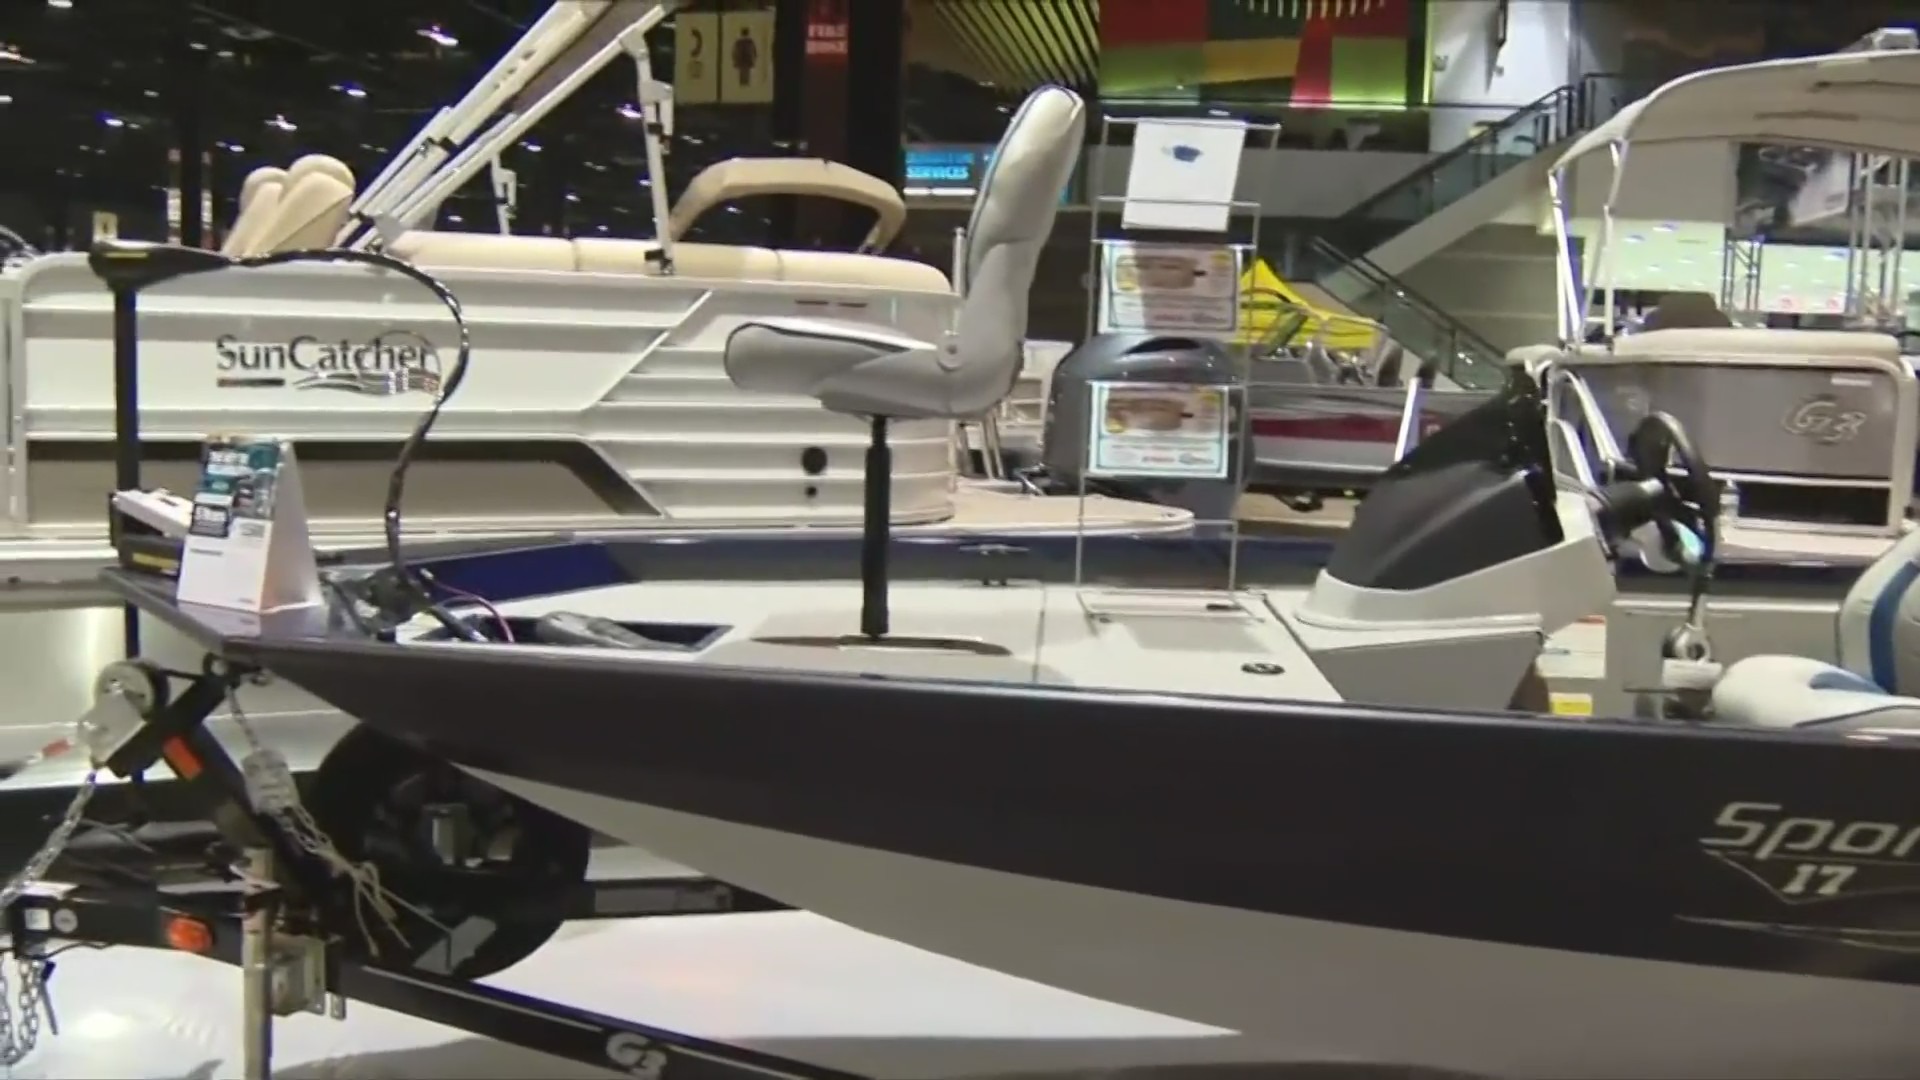 Chicago Boat Show Won’t Be Sailing Into McCormick Place This Year, Thanks To COVID And Supply Chain Issues